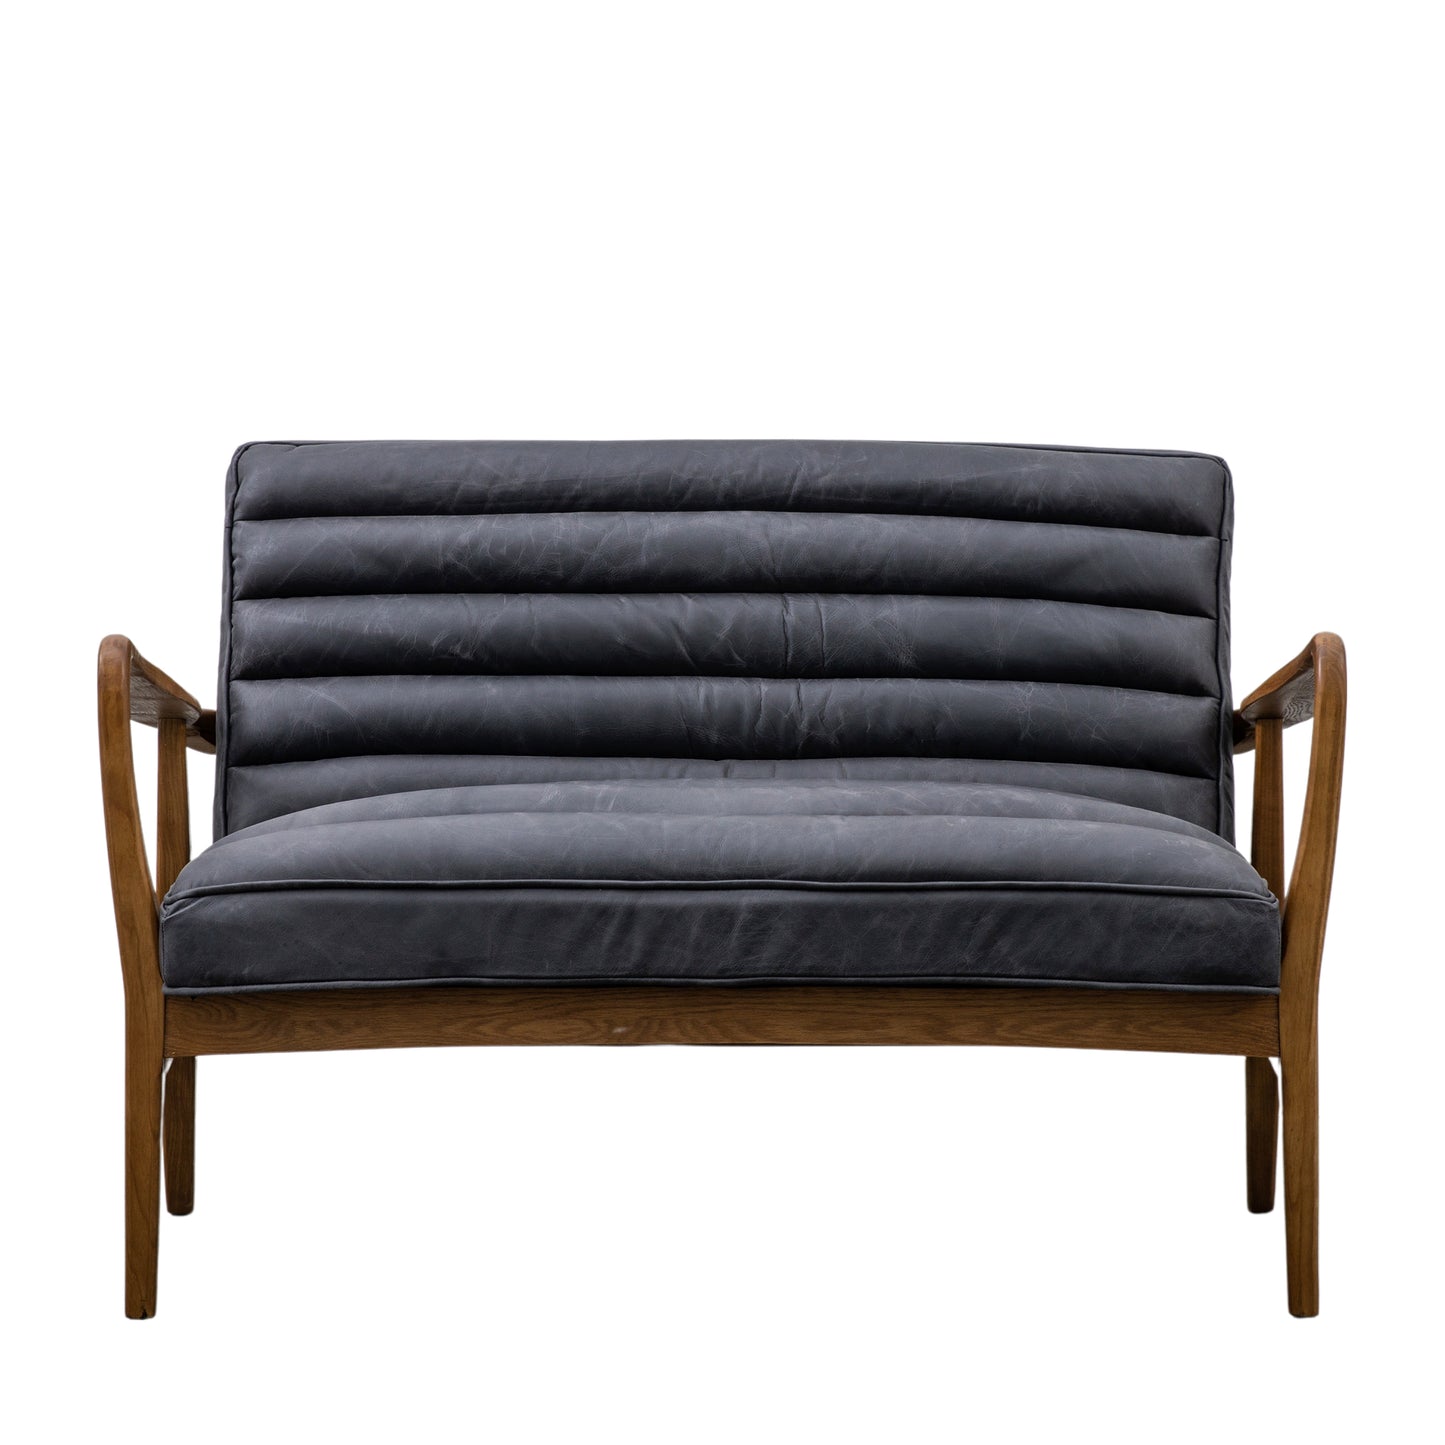 A vintage 2 seater sofa with a dark leather seat and wooden legs, perfect for interior decor.